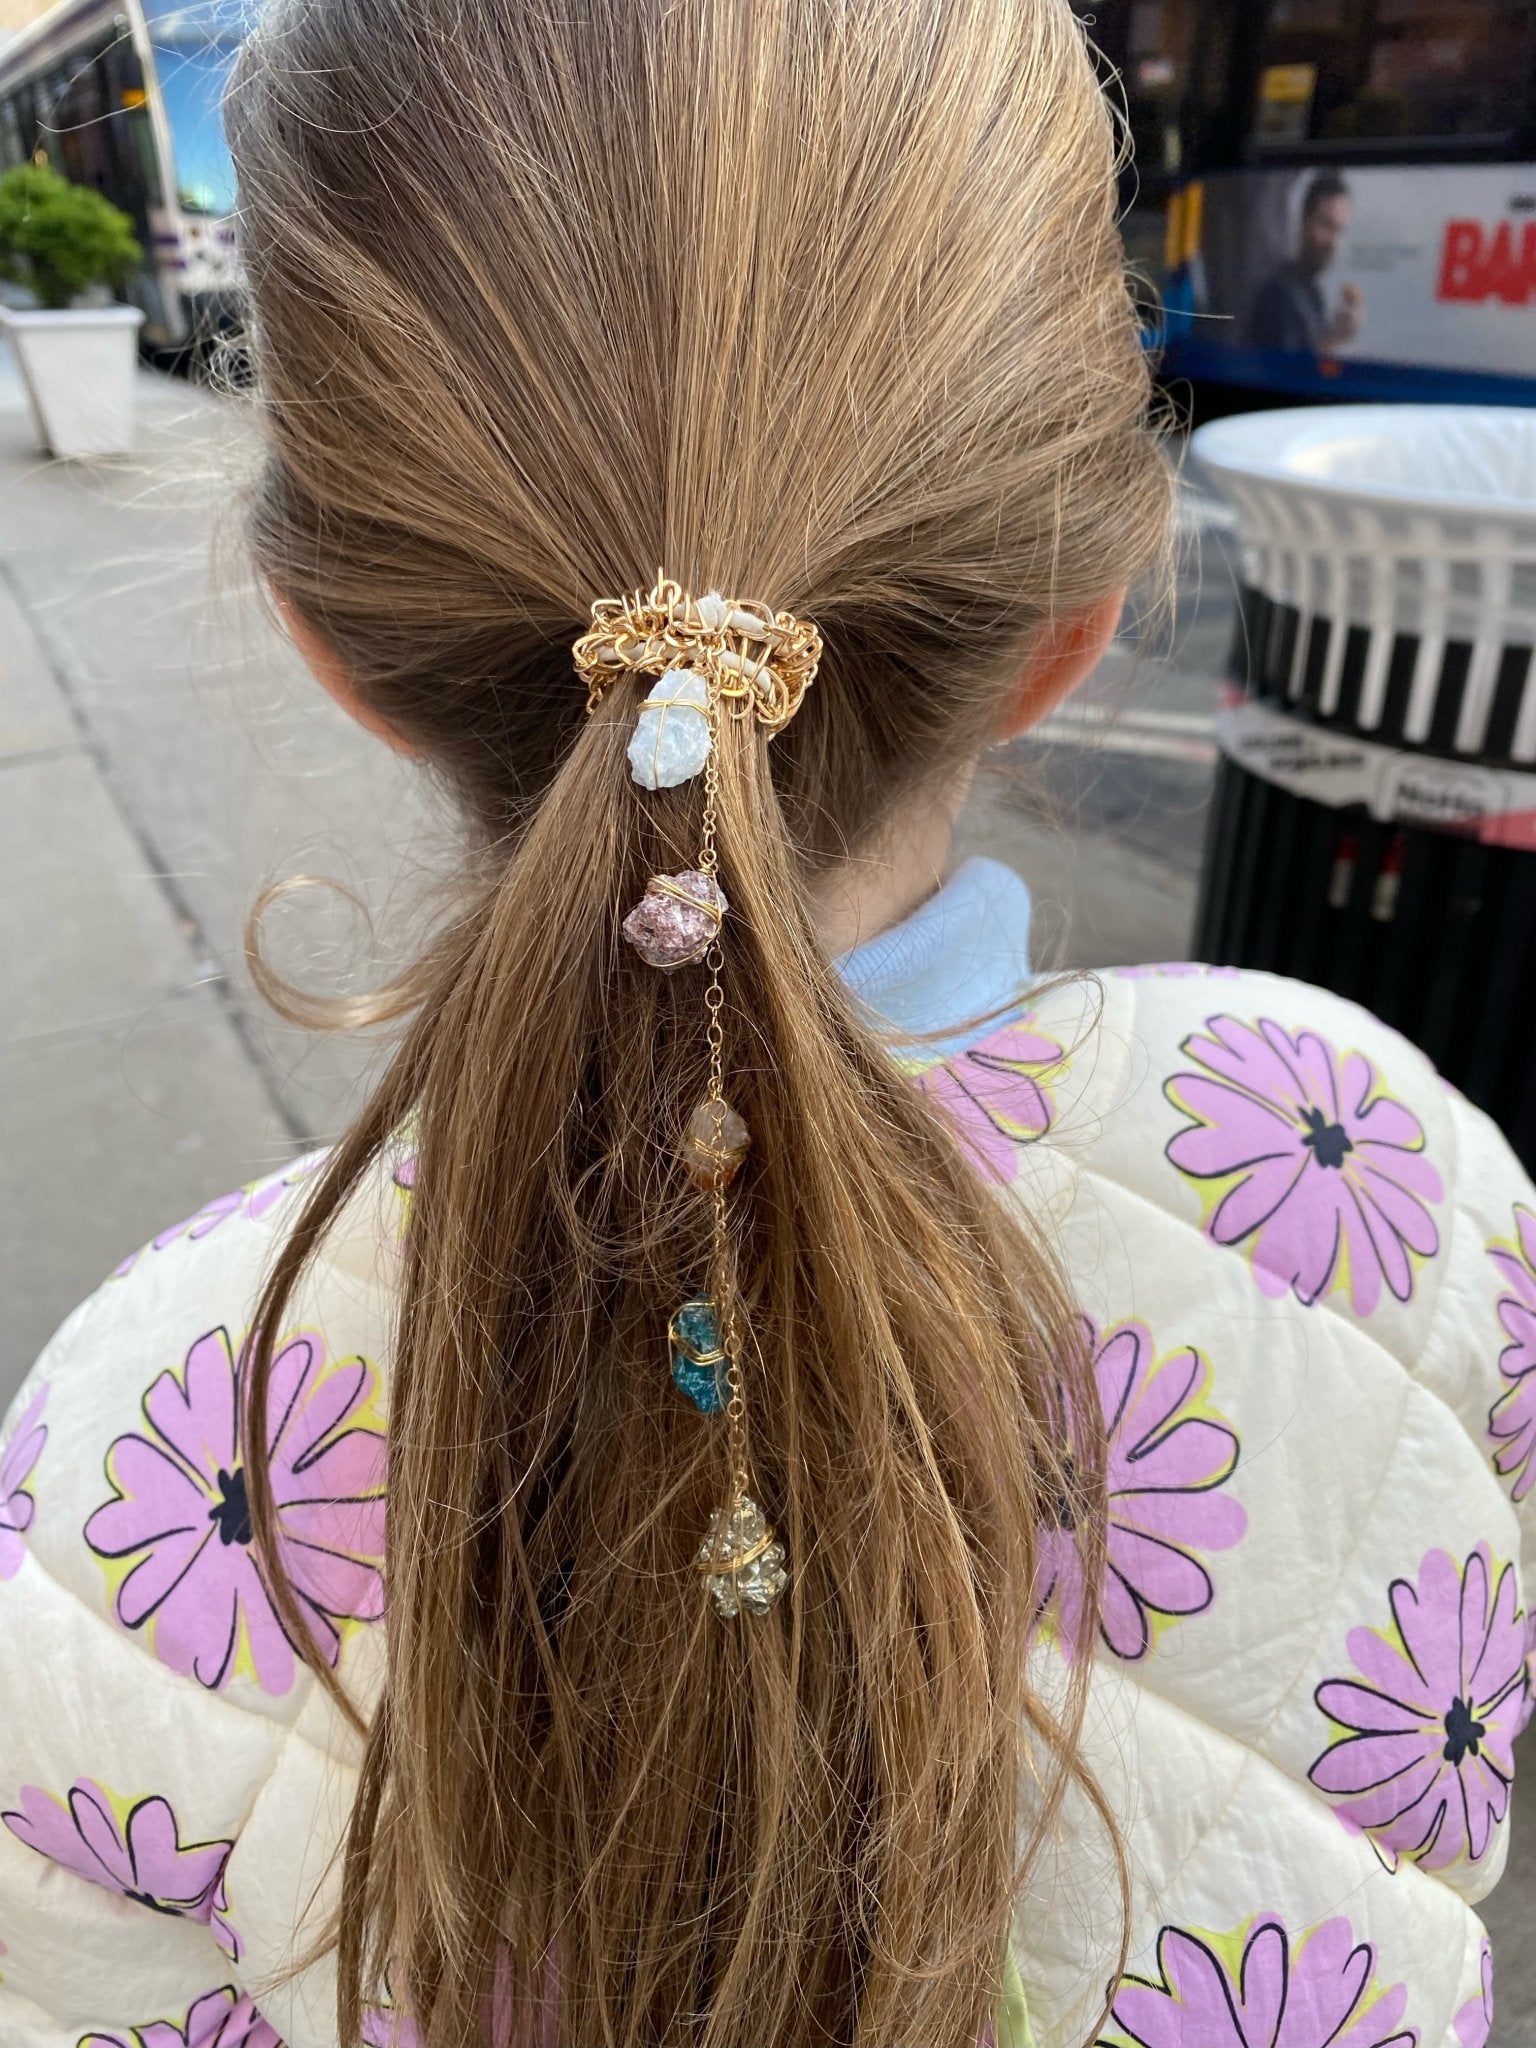 Delicate Kids Dripping Stones Hair Tie - Ariana Ost